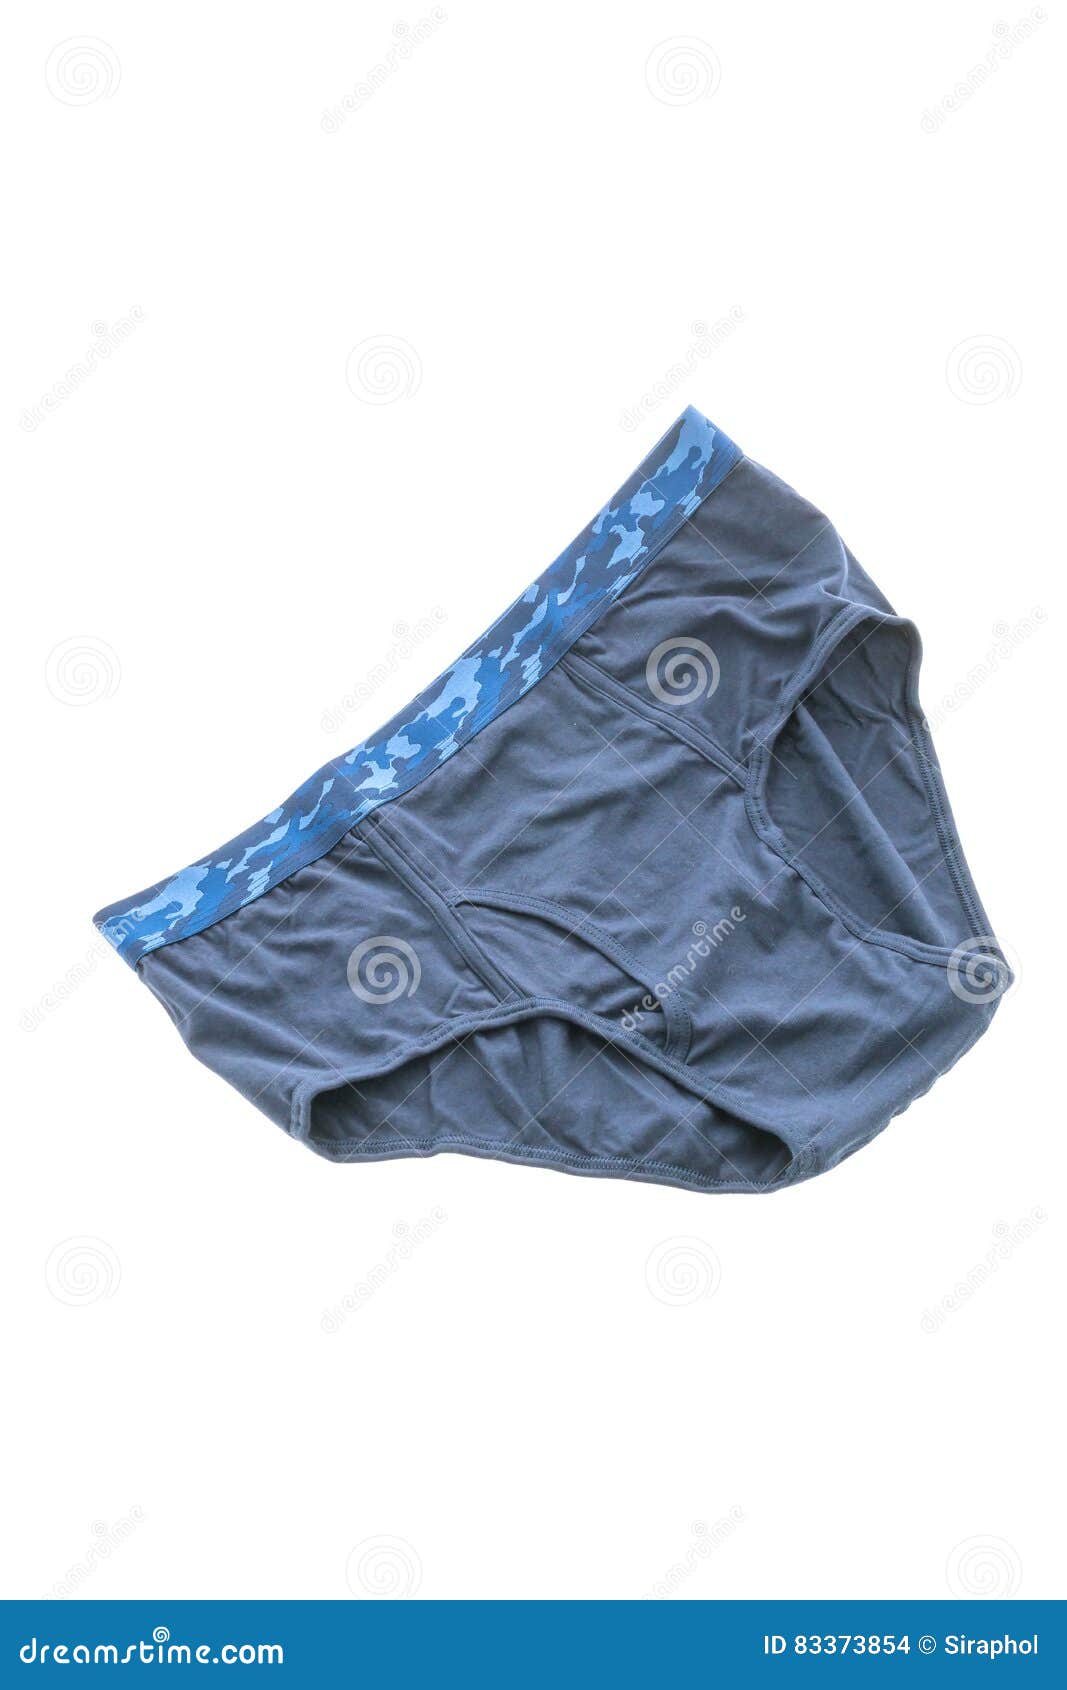 Man underwear for clothing stock photo. Image of hanging - 83373854